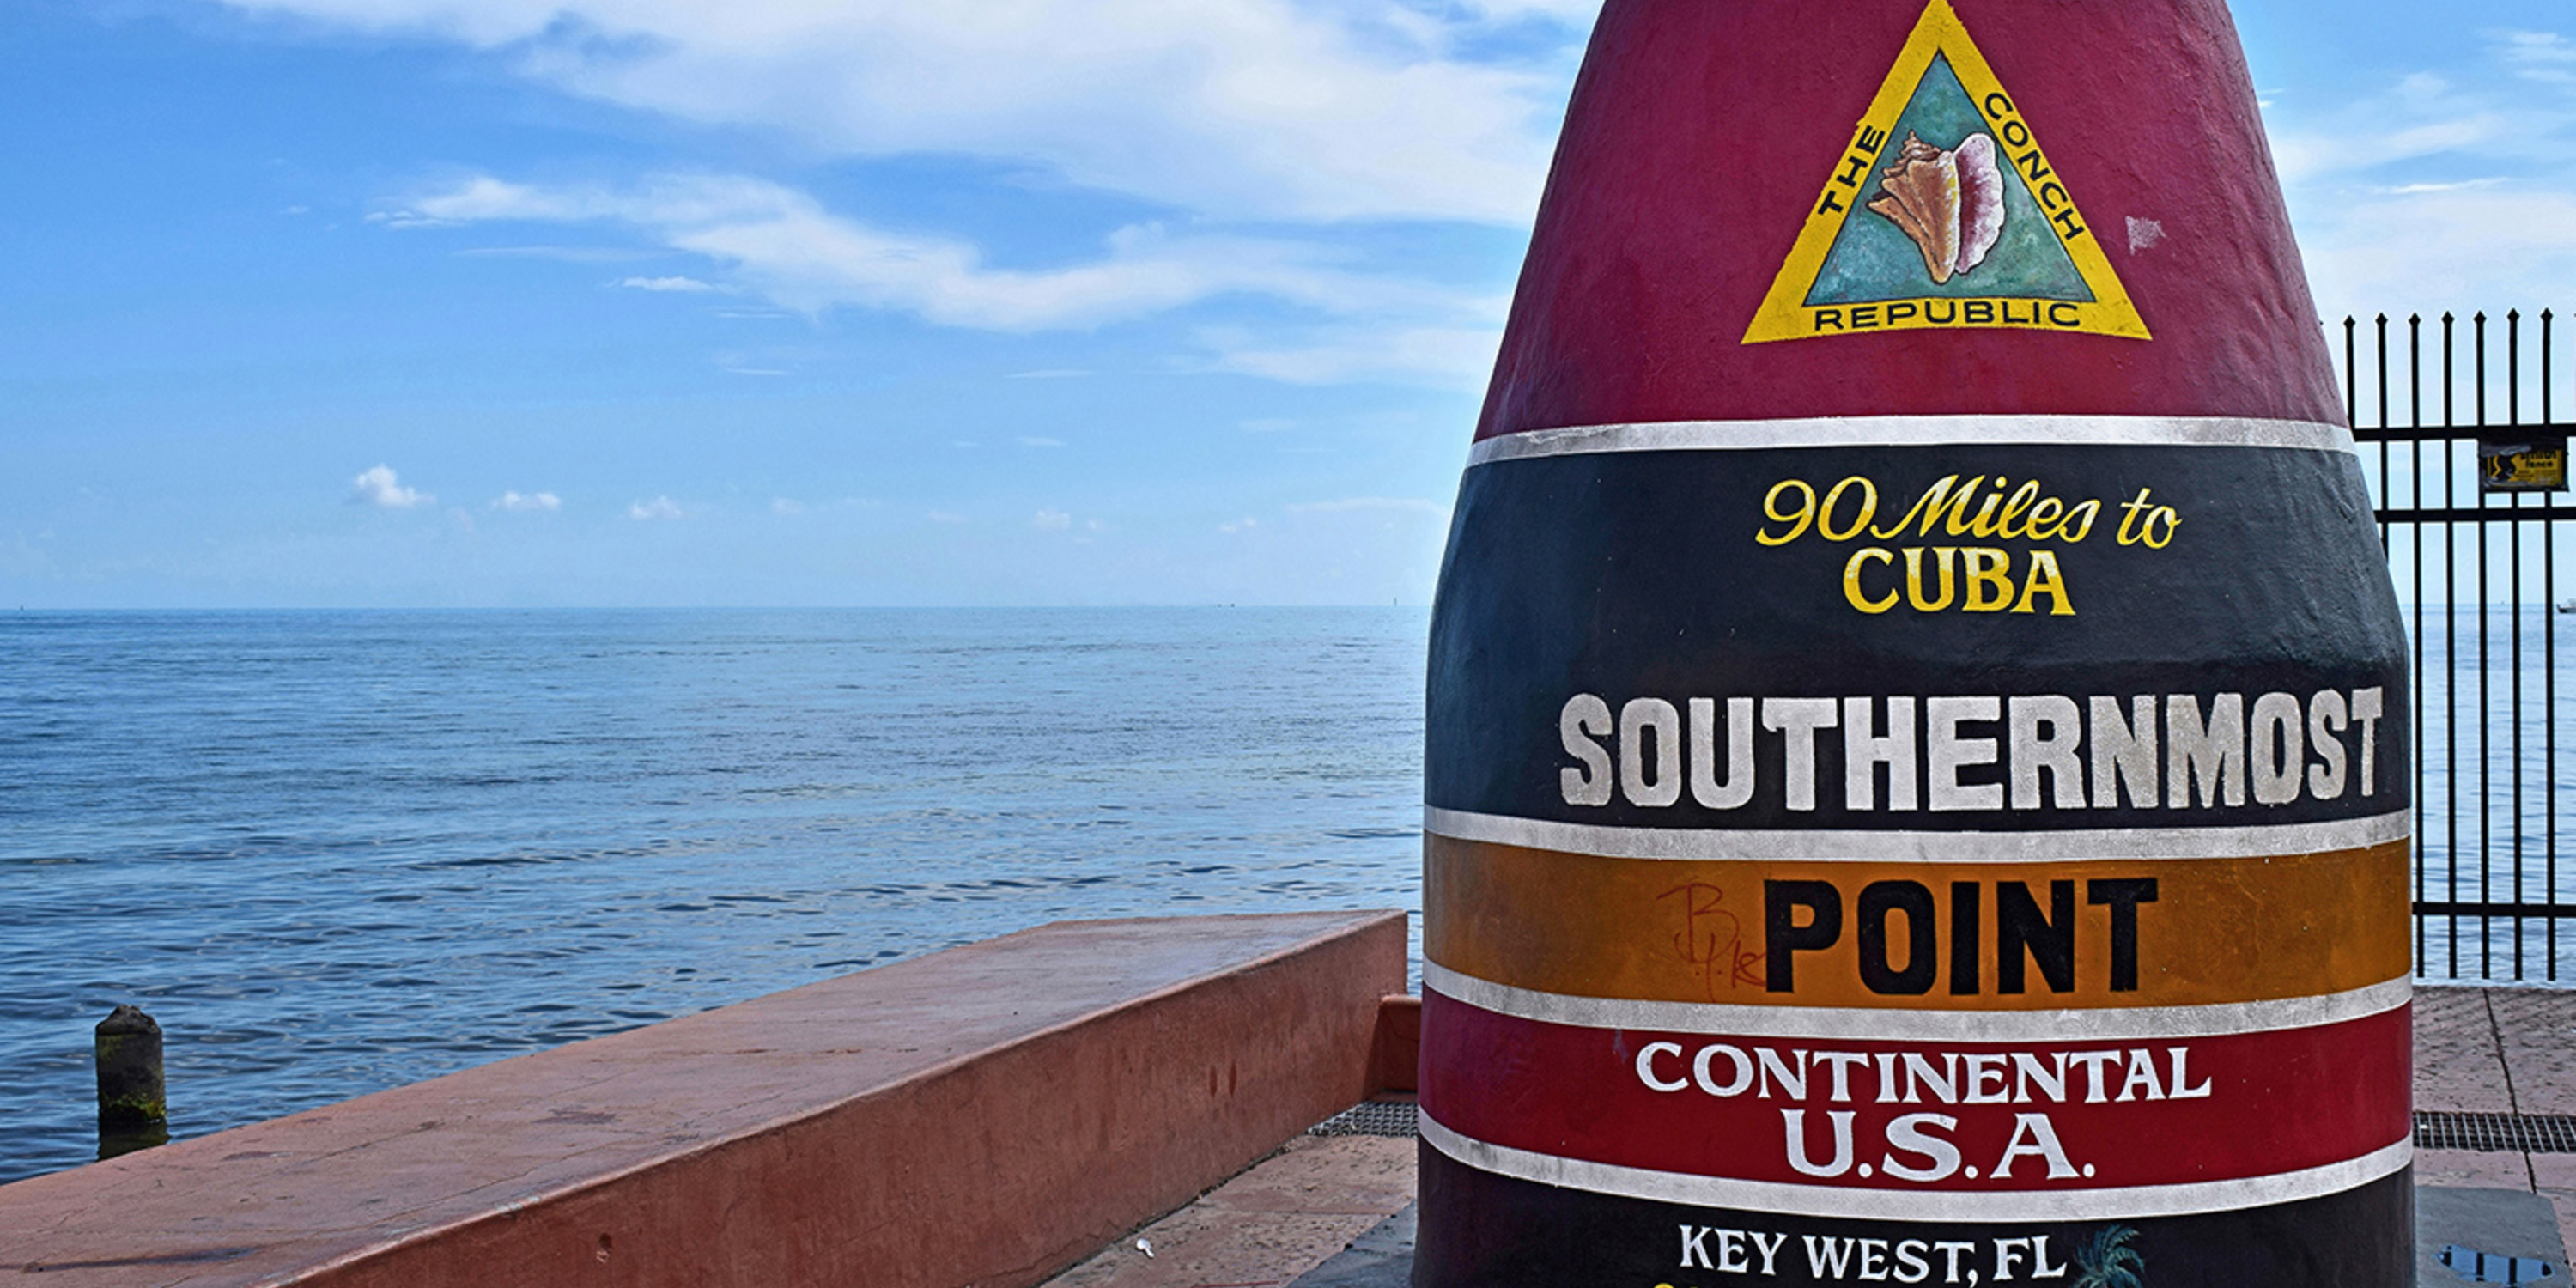 Marker: "90 Miles to Cuba. Southernmost Point, Continental USA. Key West, FL" 